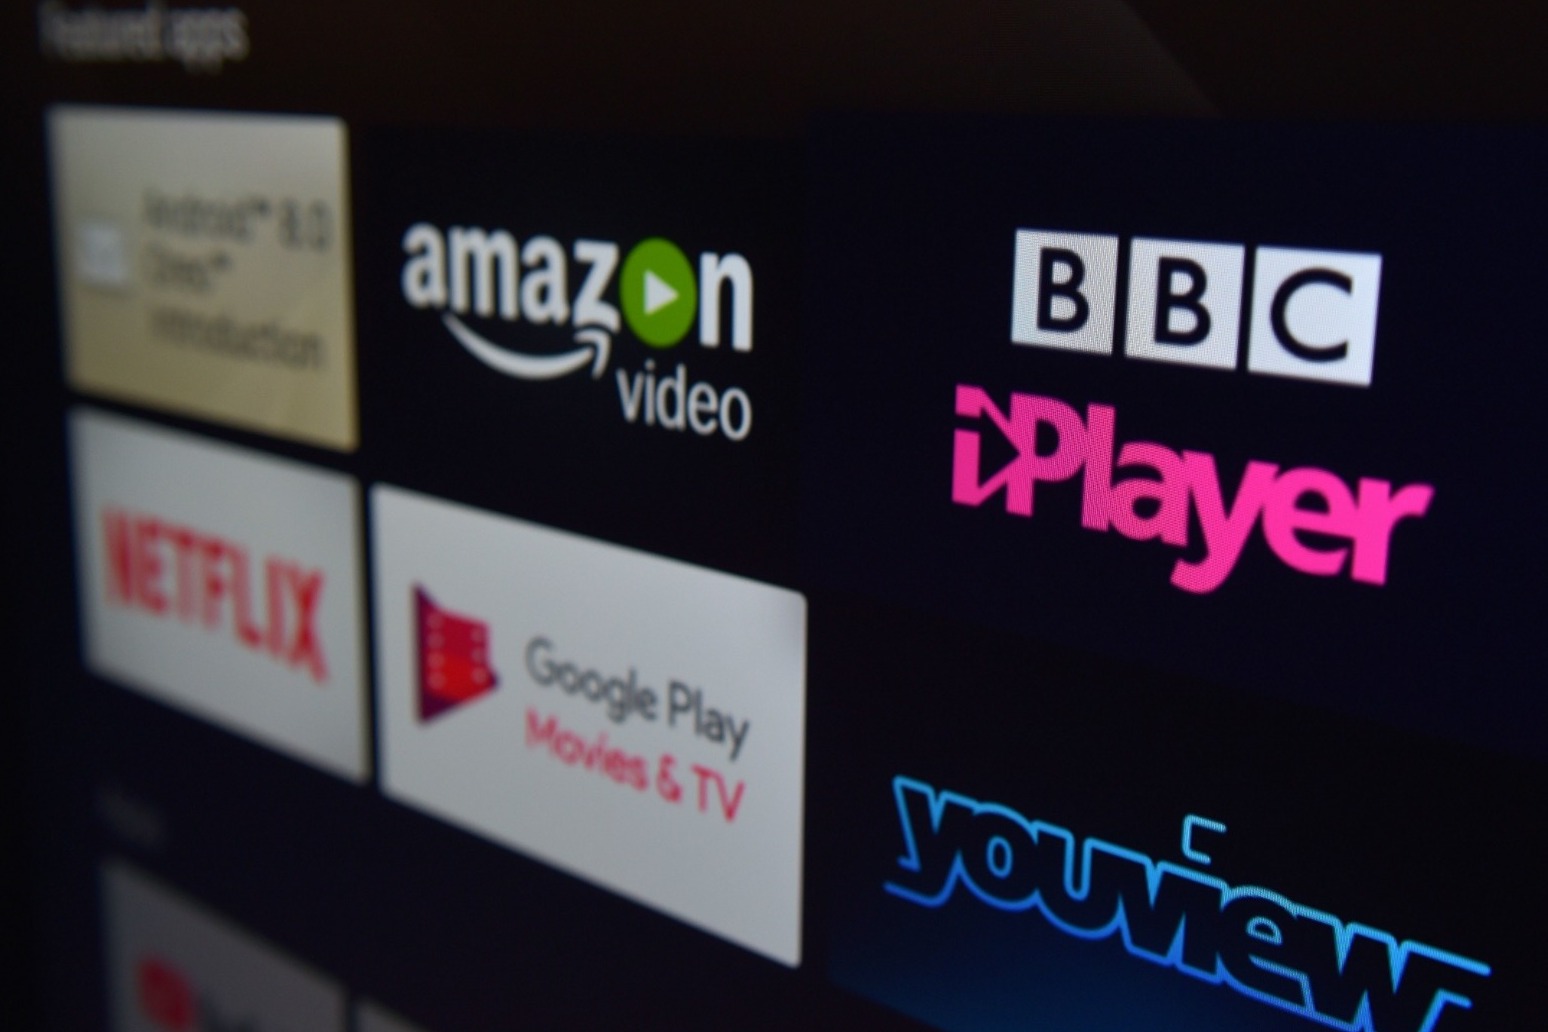 BBC iPlayer lags behind Netflix and Disney+ on experience, watchdog says 